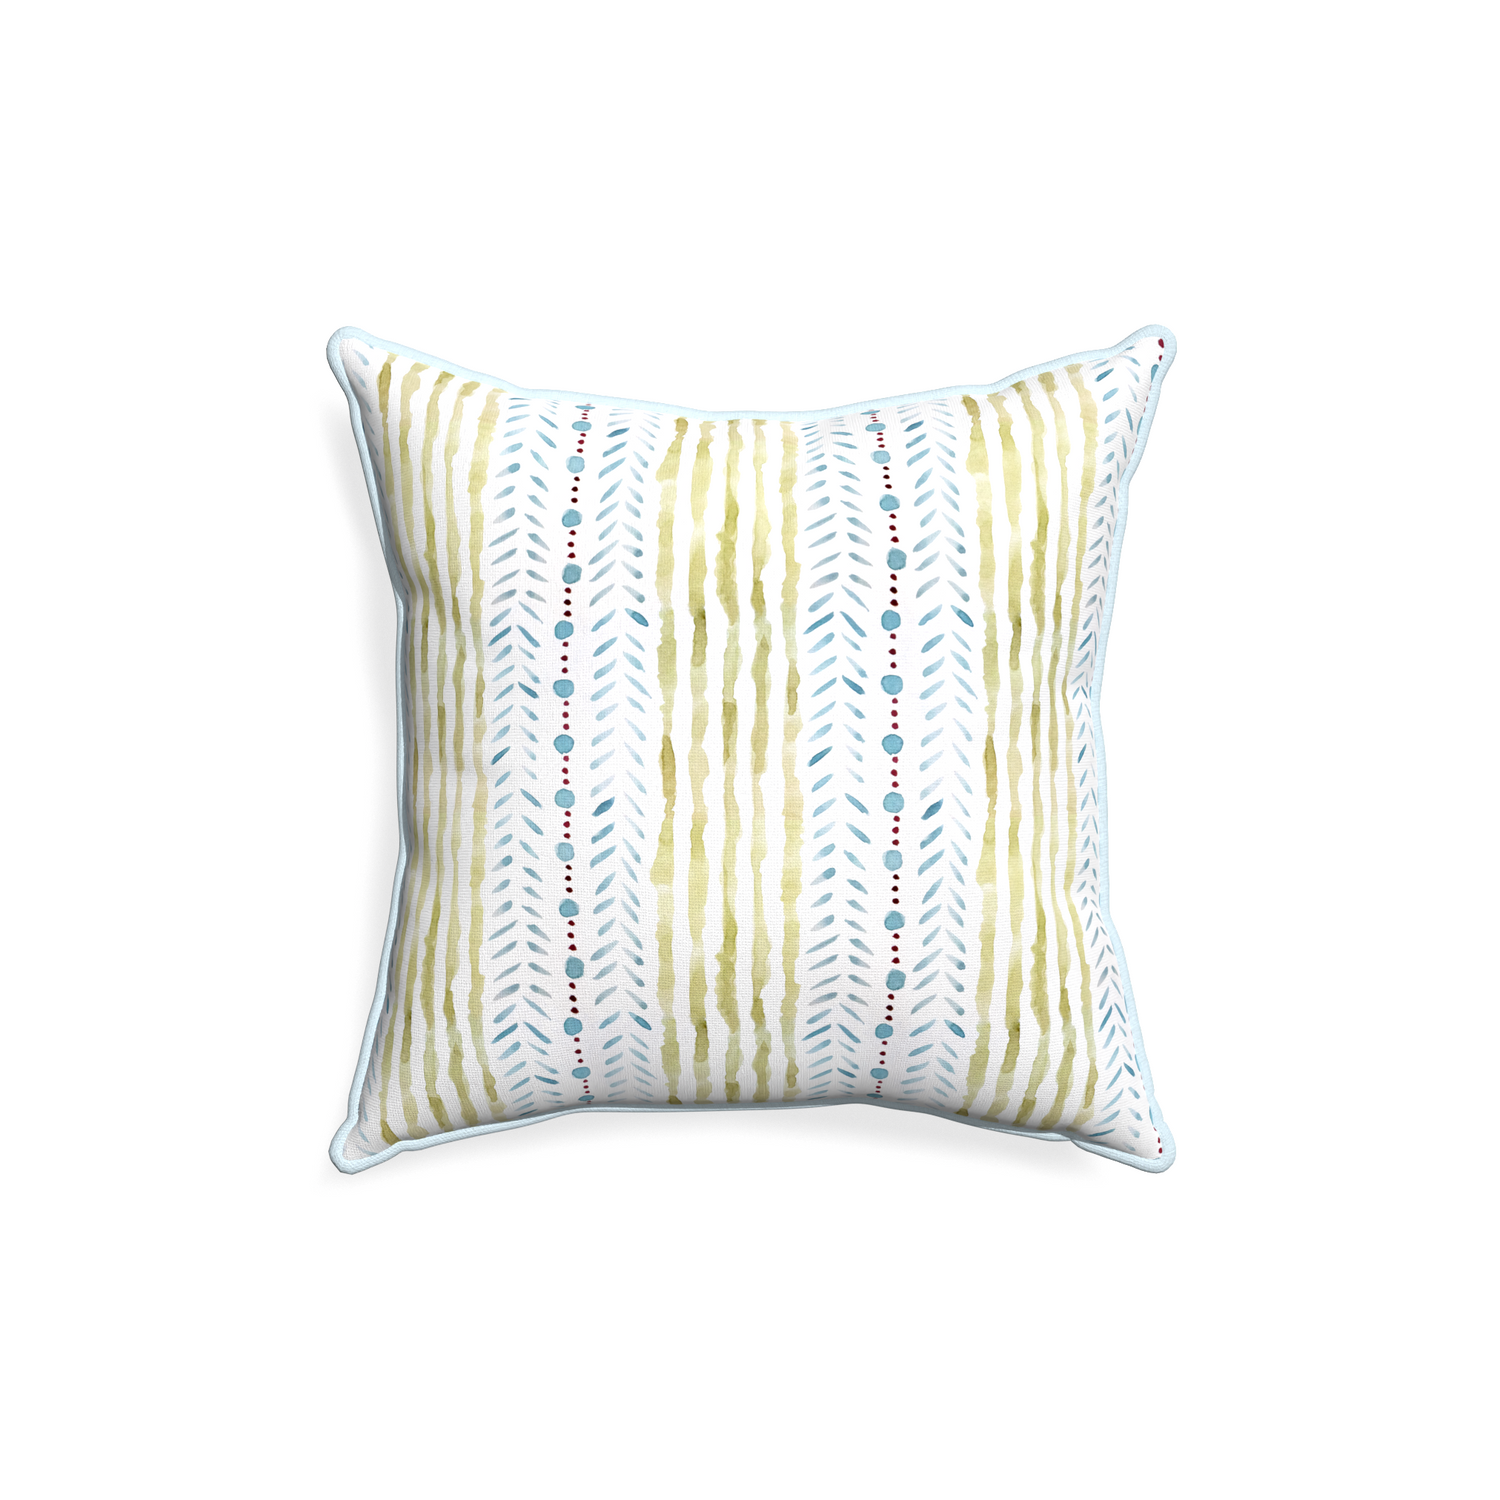 18-square julia custom blue & green stripedpillow with powder piping on white background